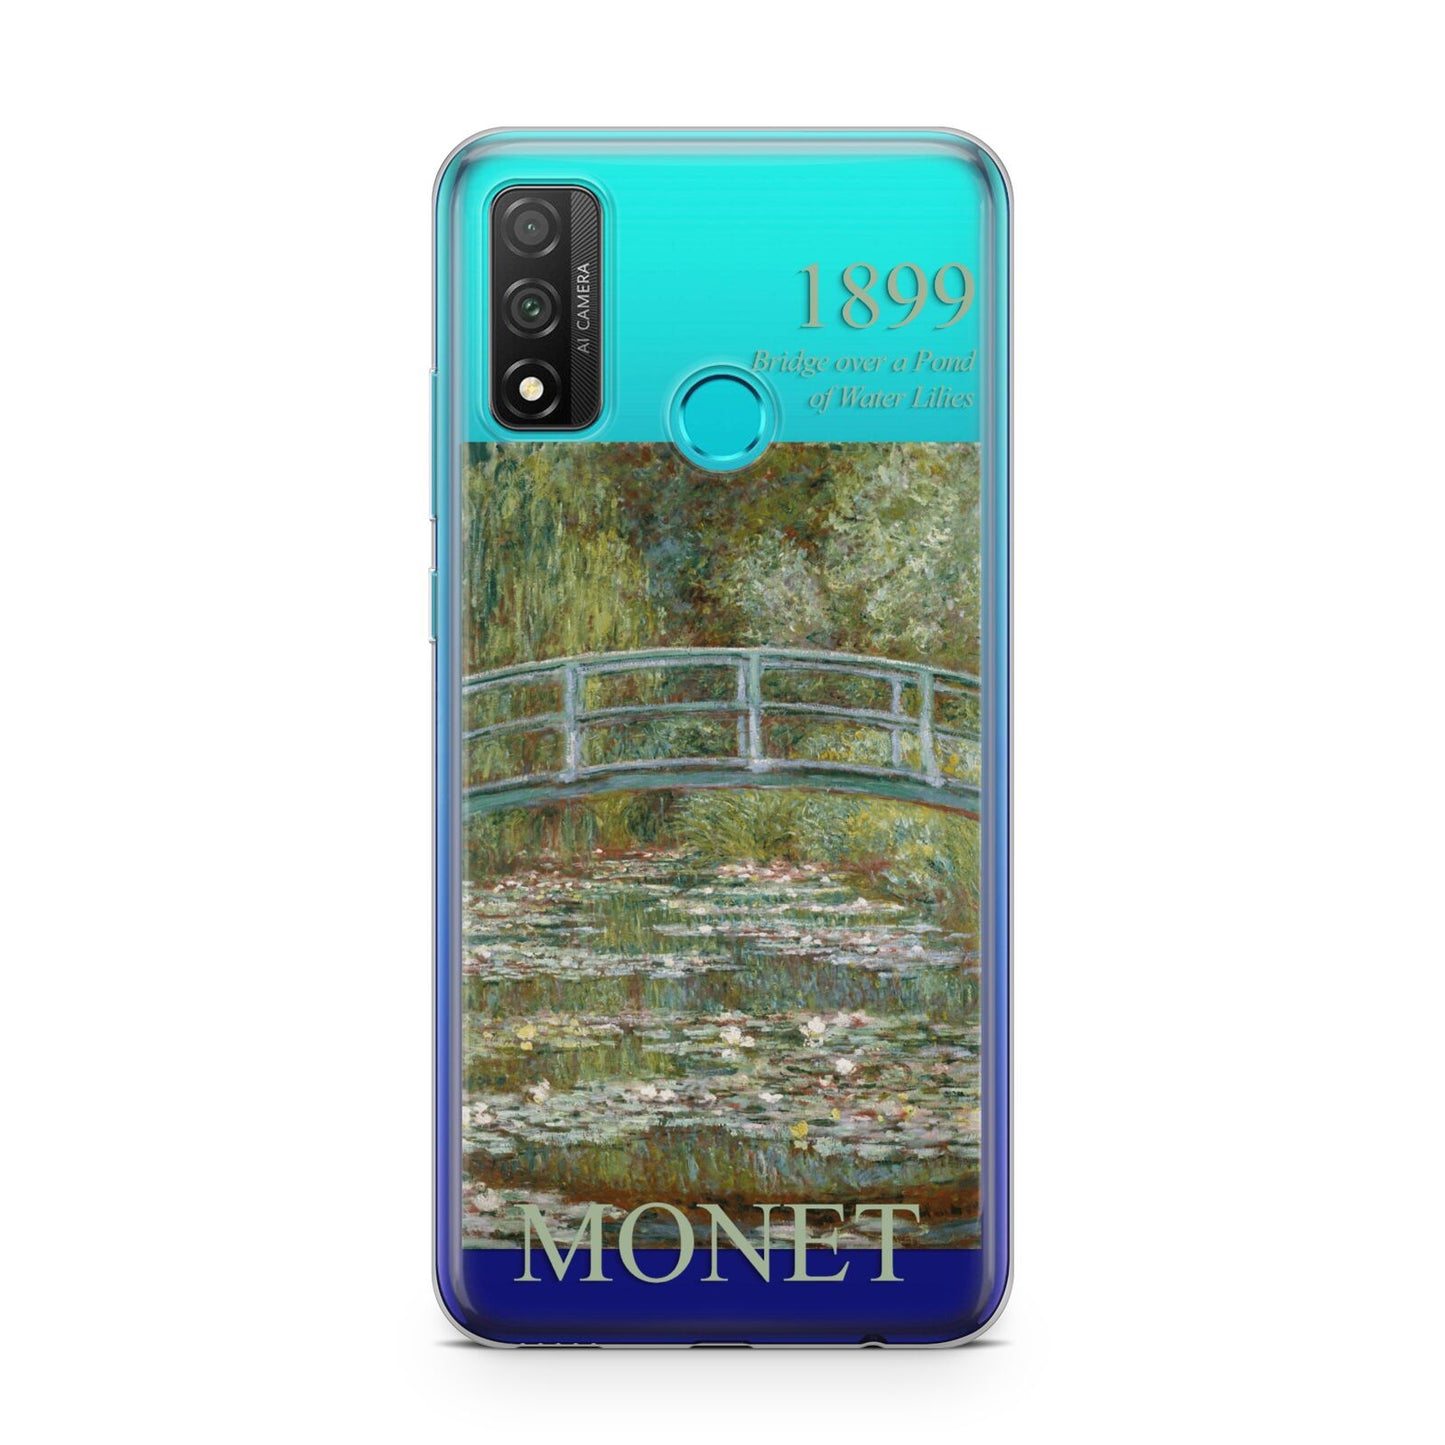 Bridge Over A Pond Of Water Lilies By Monet Huawei P Smart 2020